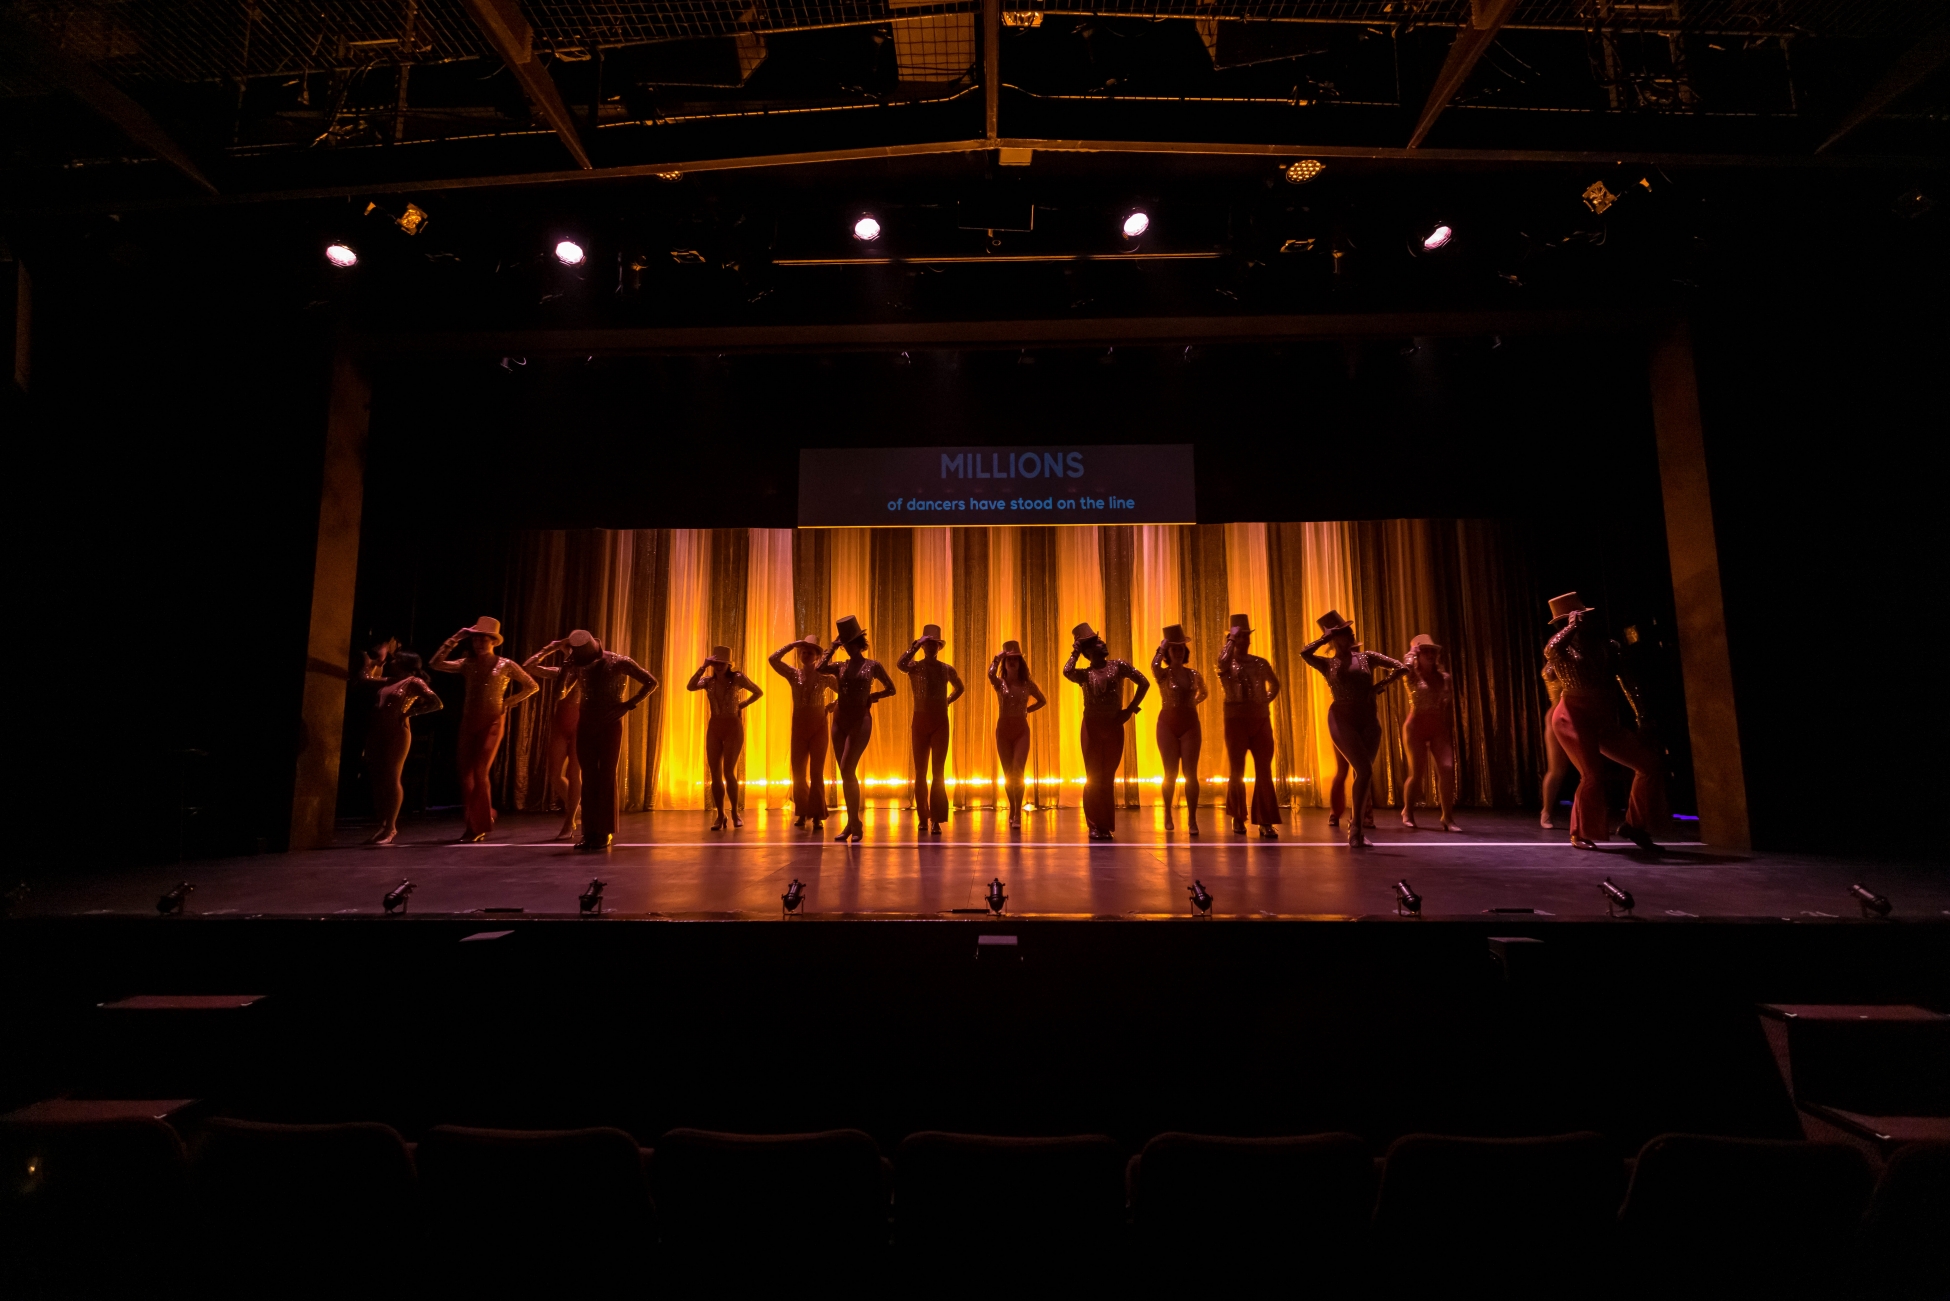 Dancers in A Chorus Line strike a final pose, the lights dim on them.